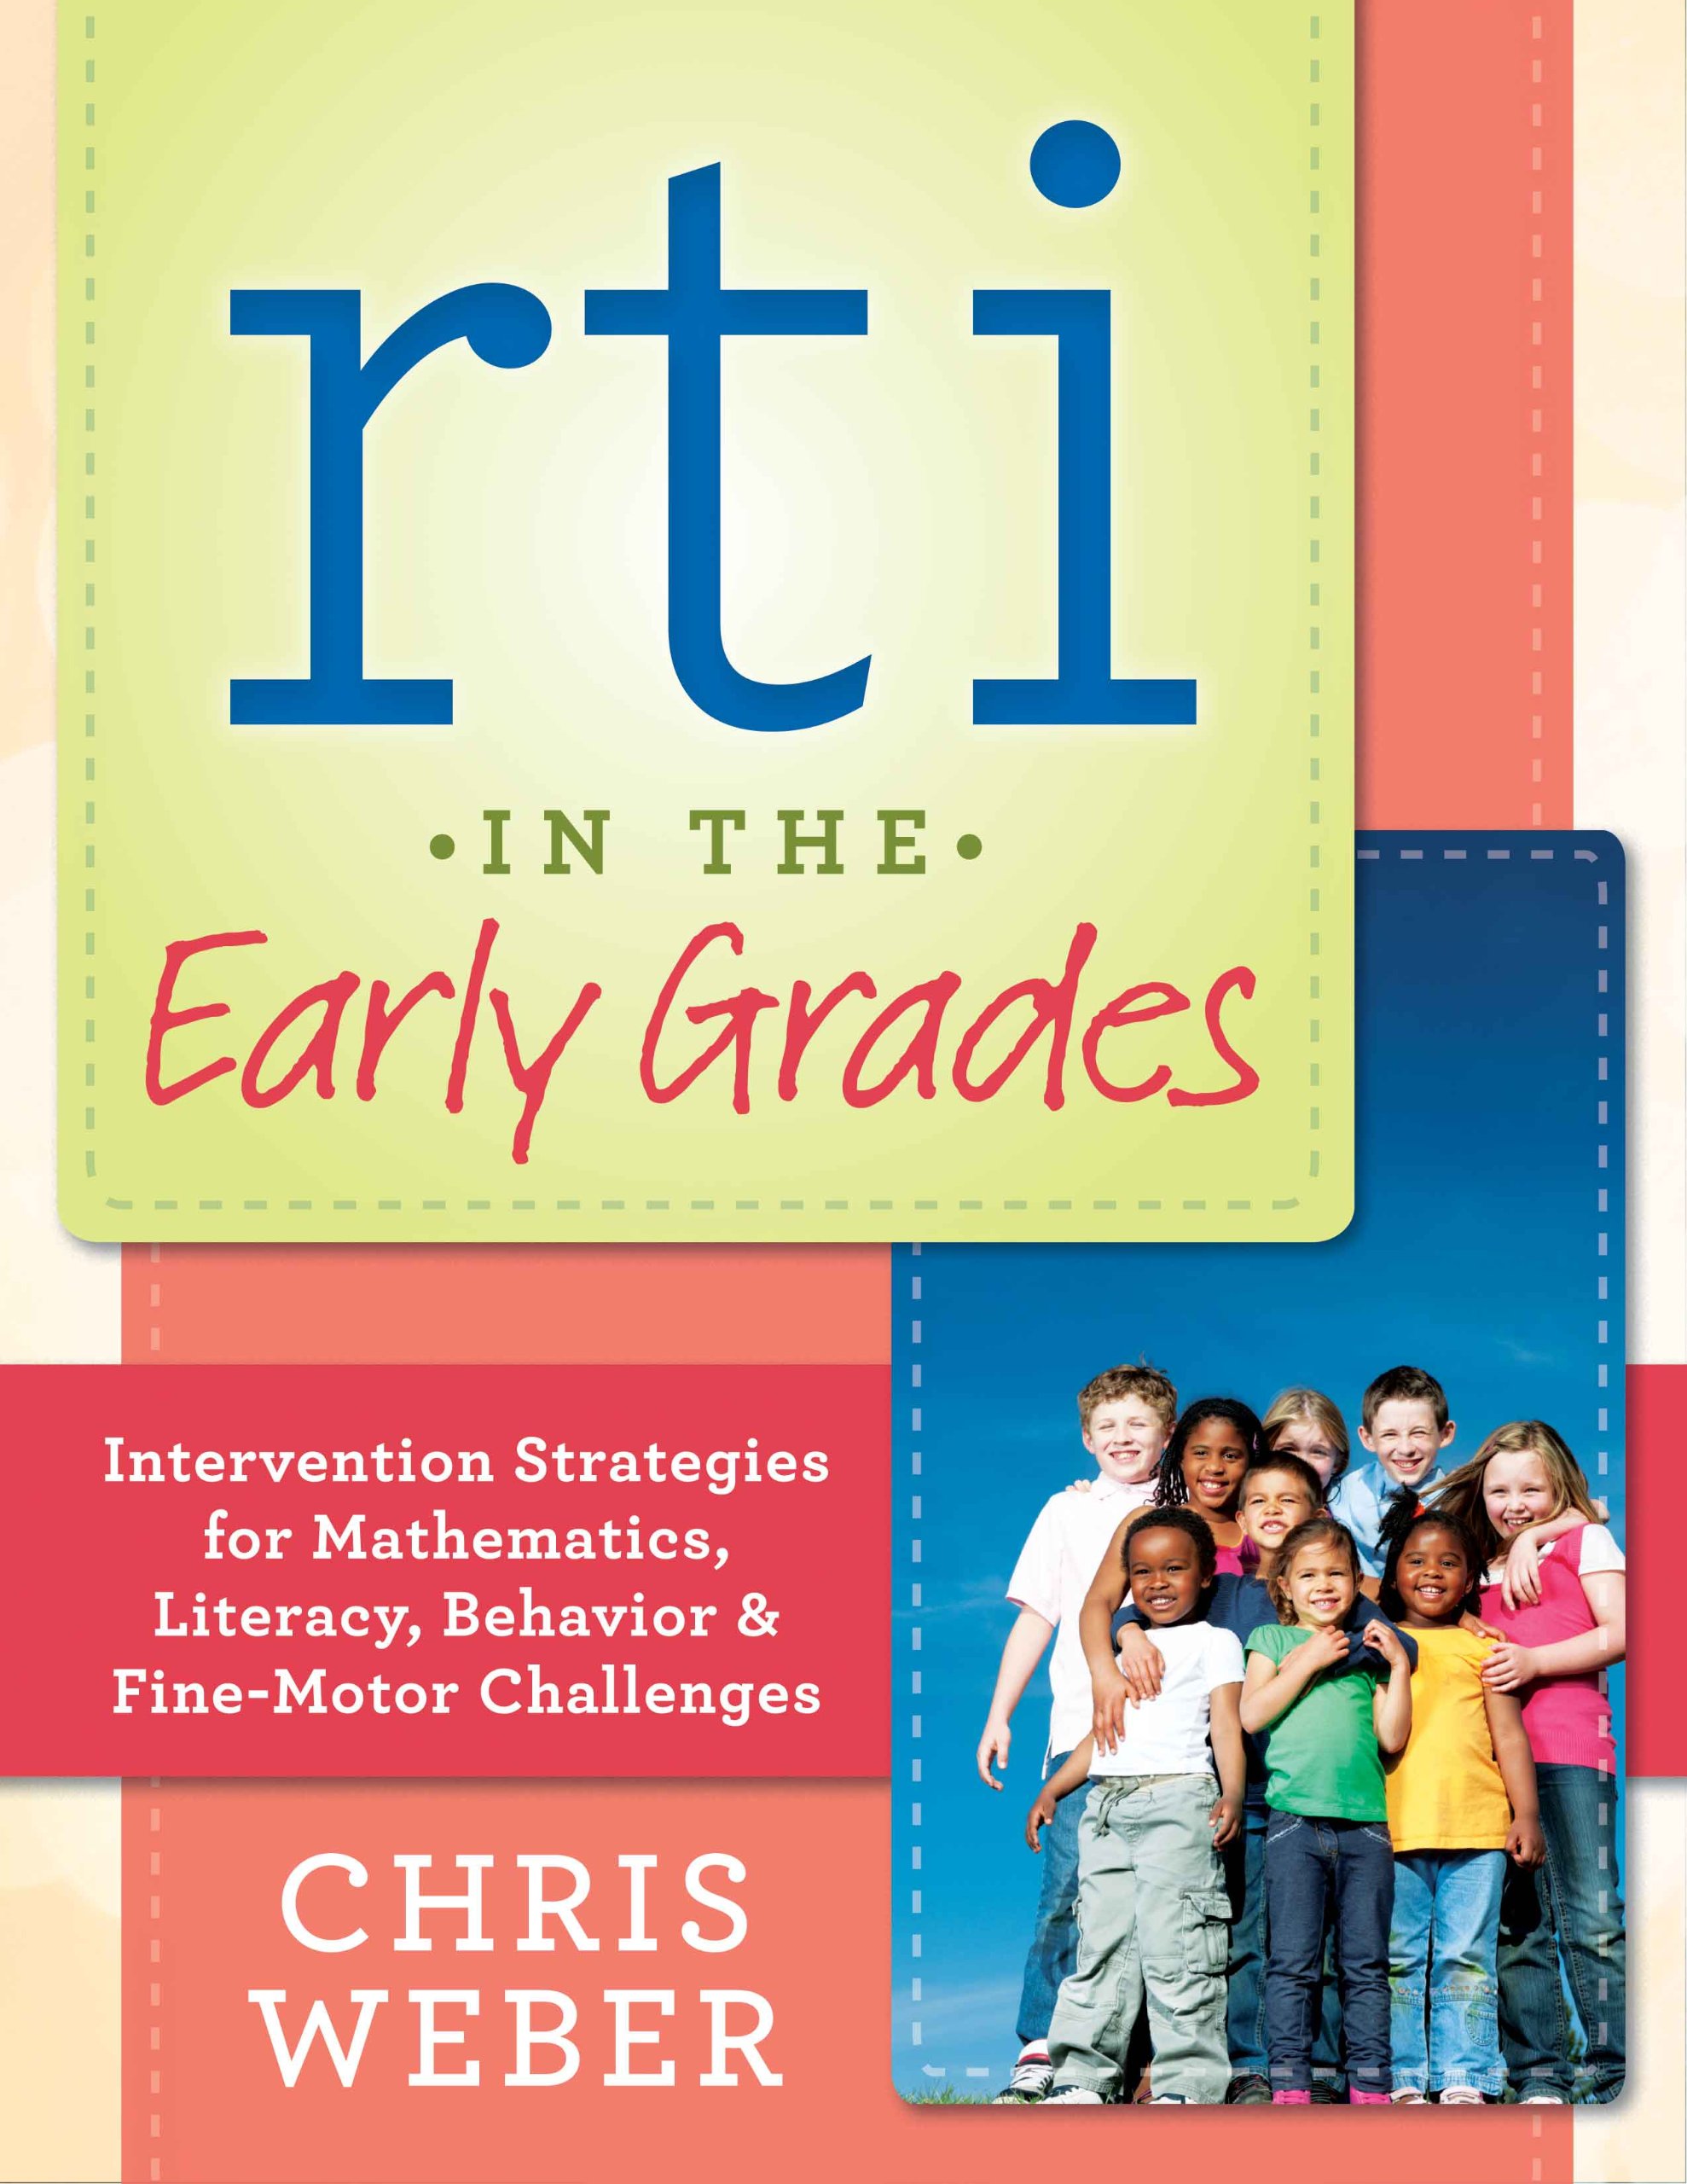 RTI IN THE EARLY GRADES: INTERVENTION STRATEGIES FOR MATHEMATICS, LITERACY, BEHAVIOR & FINE-MOTOR CHALLENGES